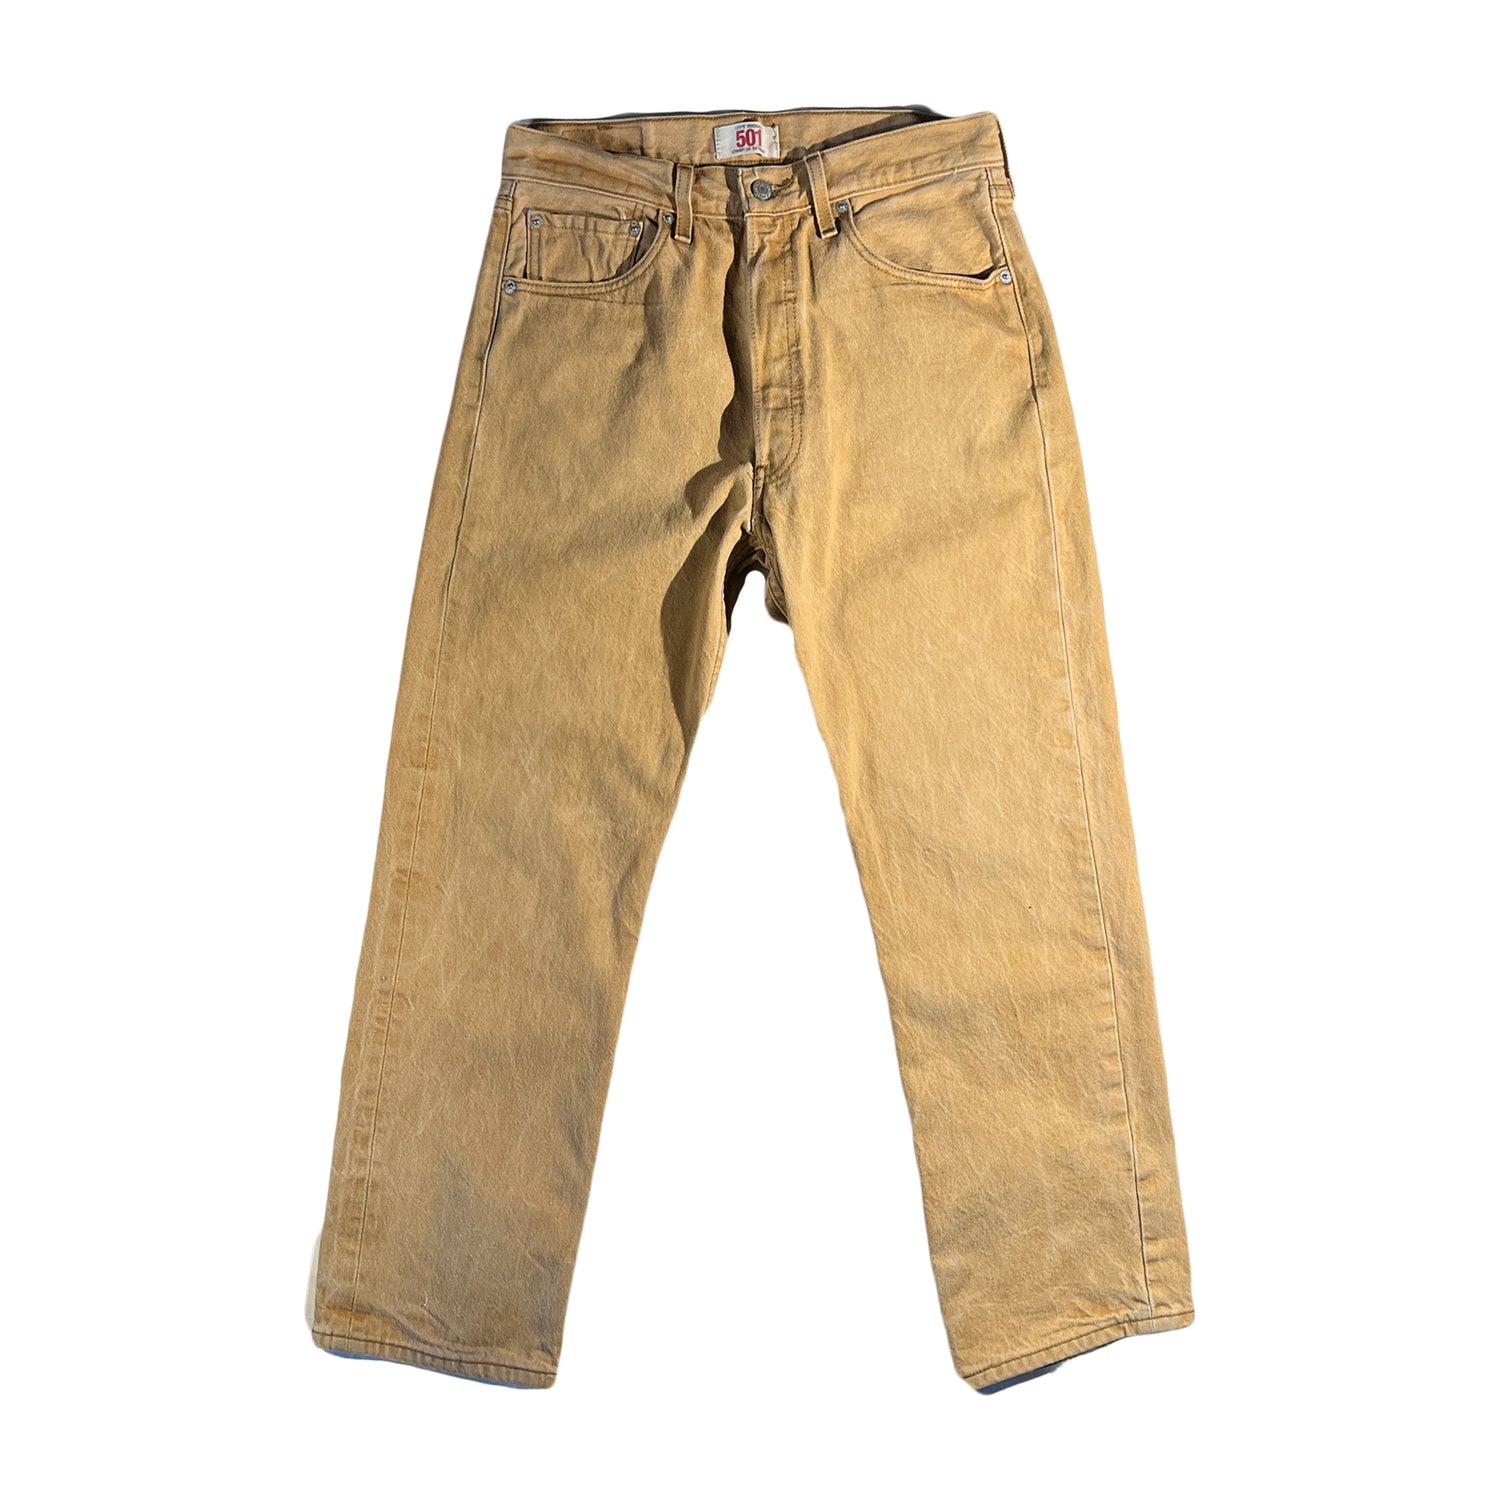 Leather Jeans Pant Real Style Men Beige Mens 501 Pants S Trousers